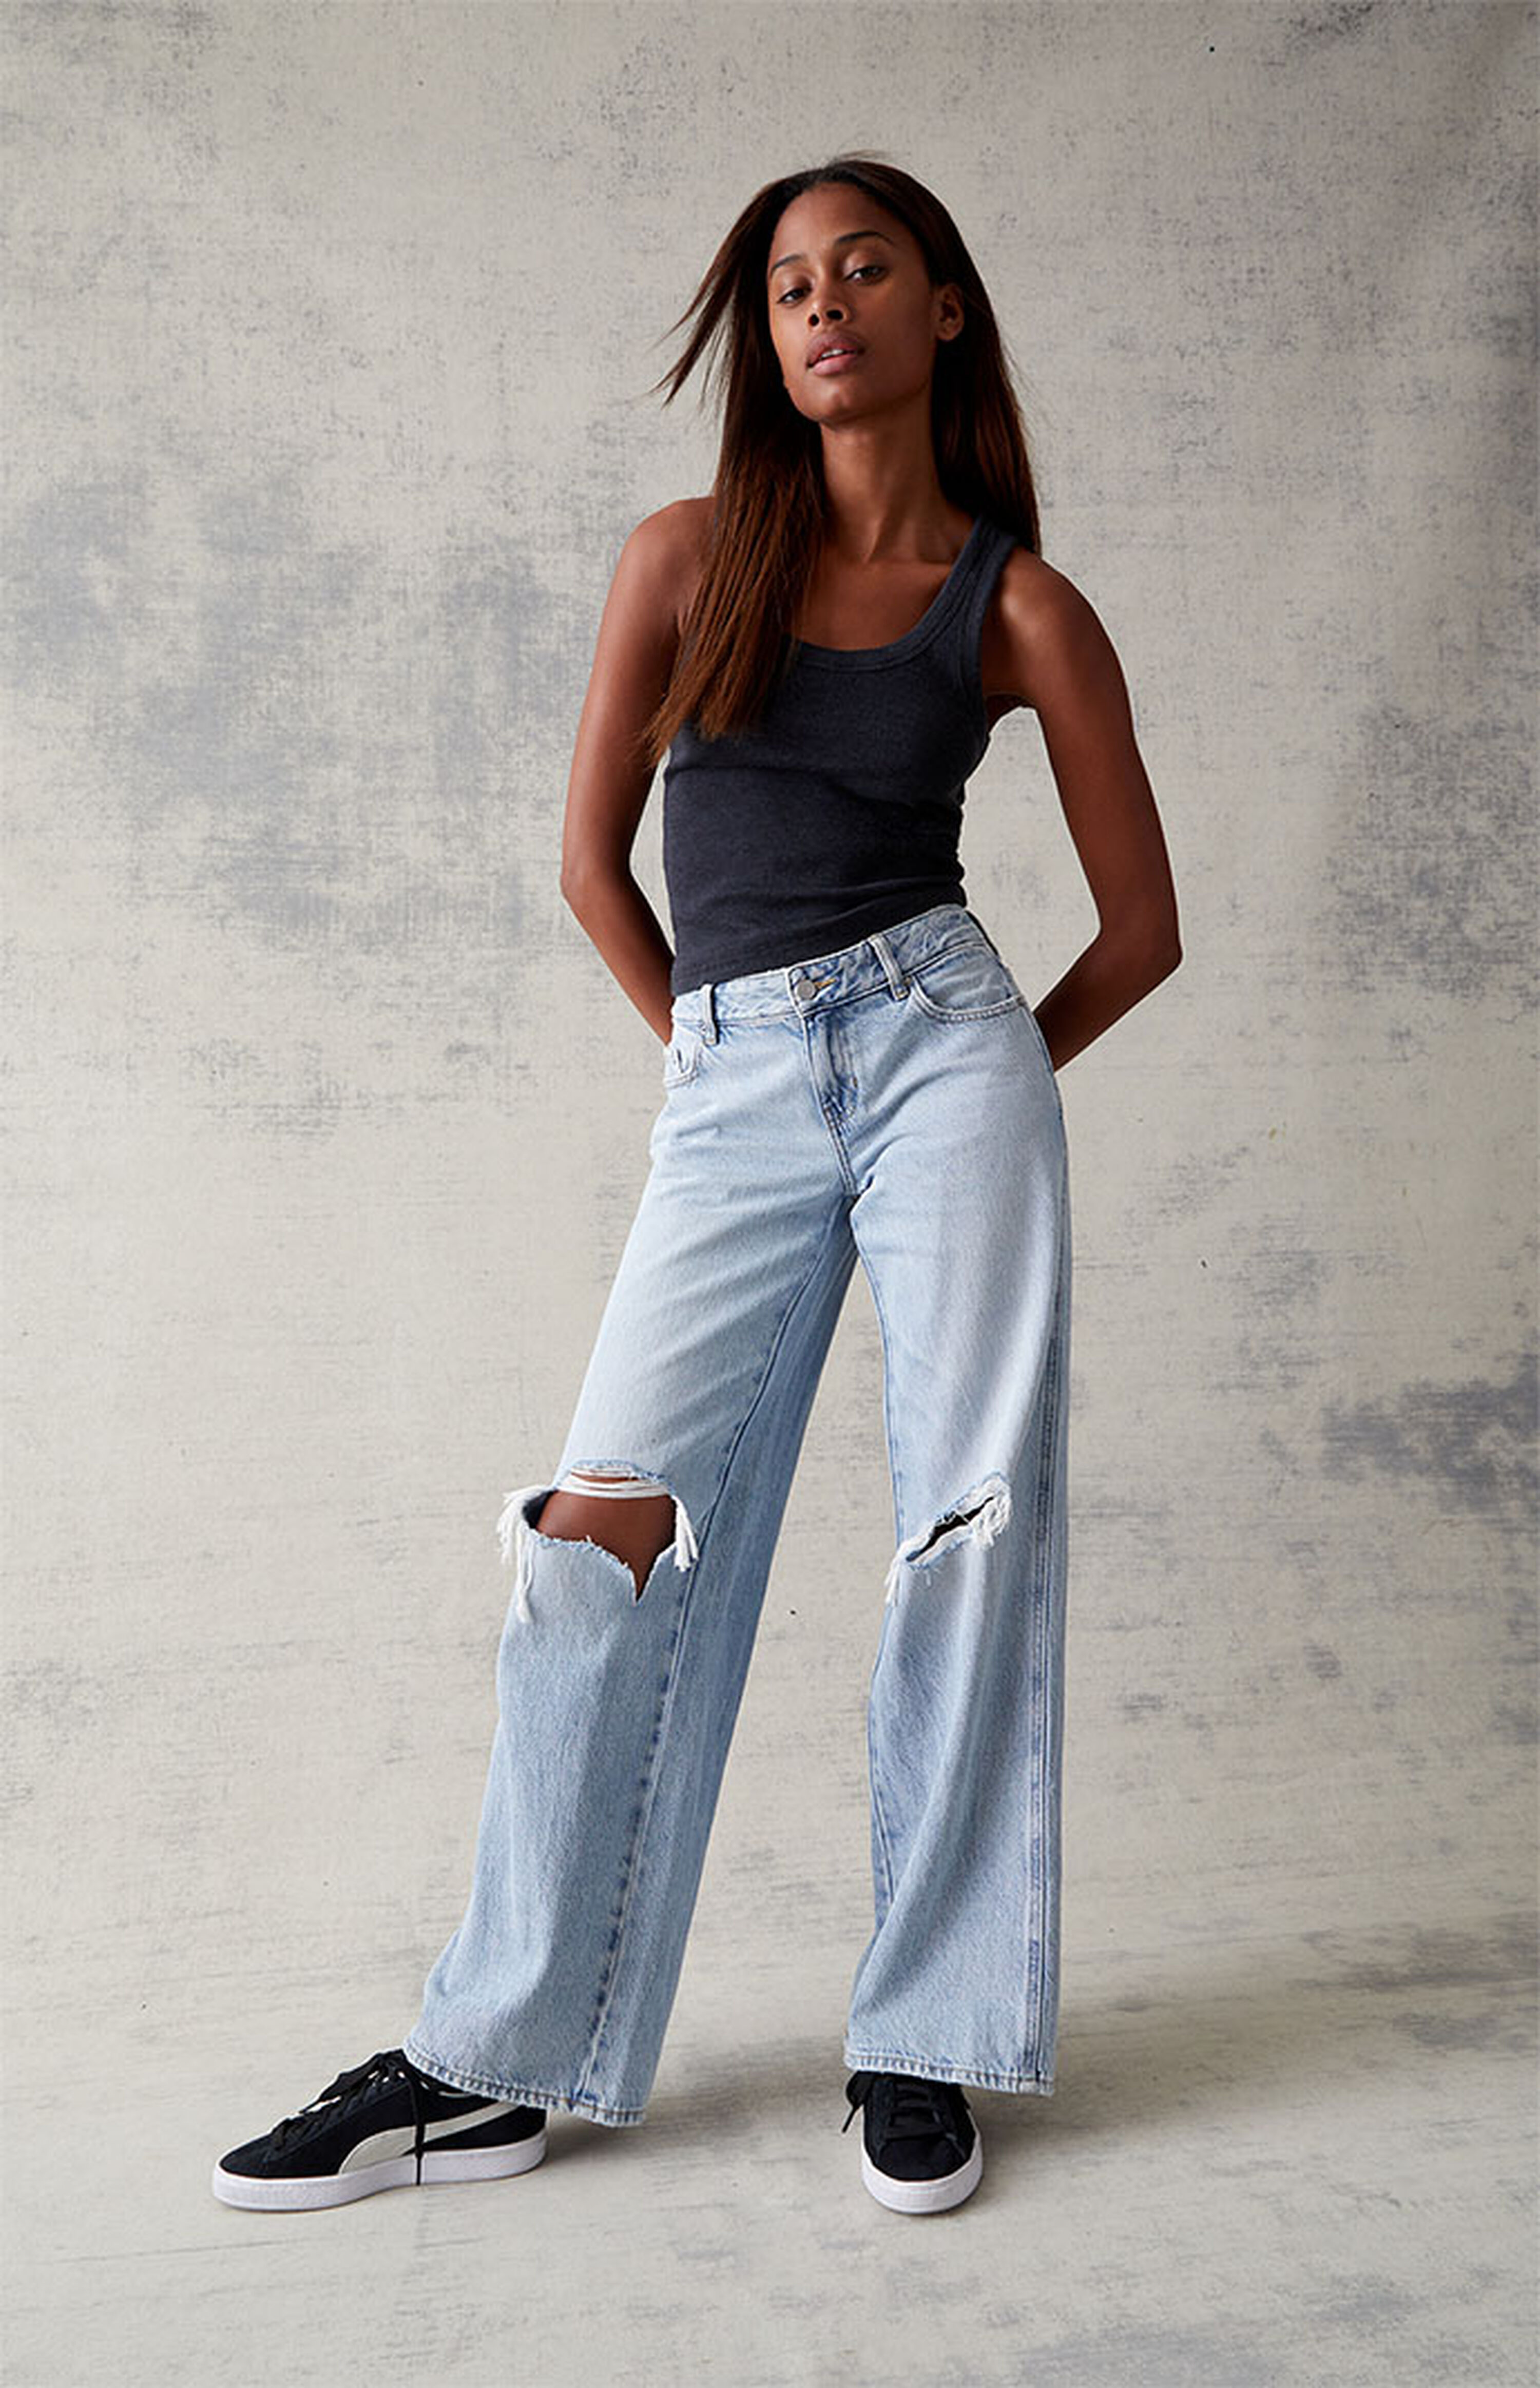 PacSun Eco Light Blue Ripped Low Rise Baggy Jeans | PacSun